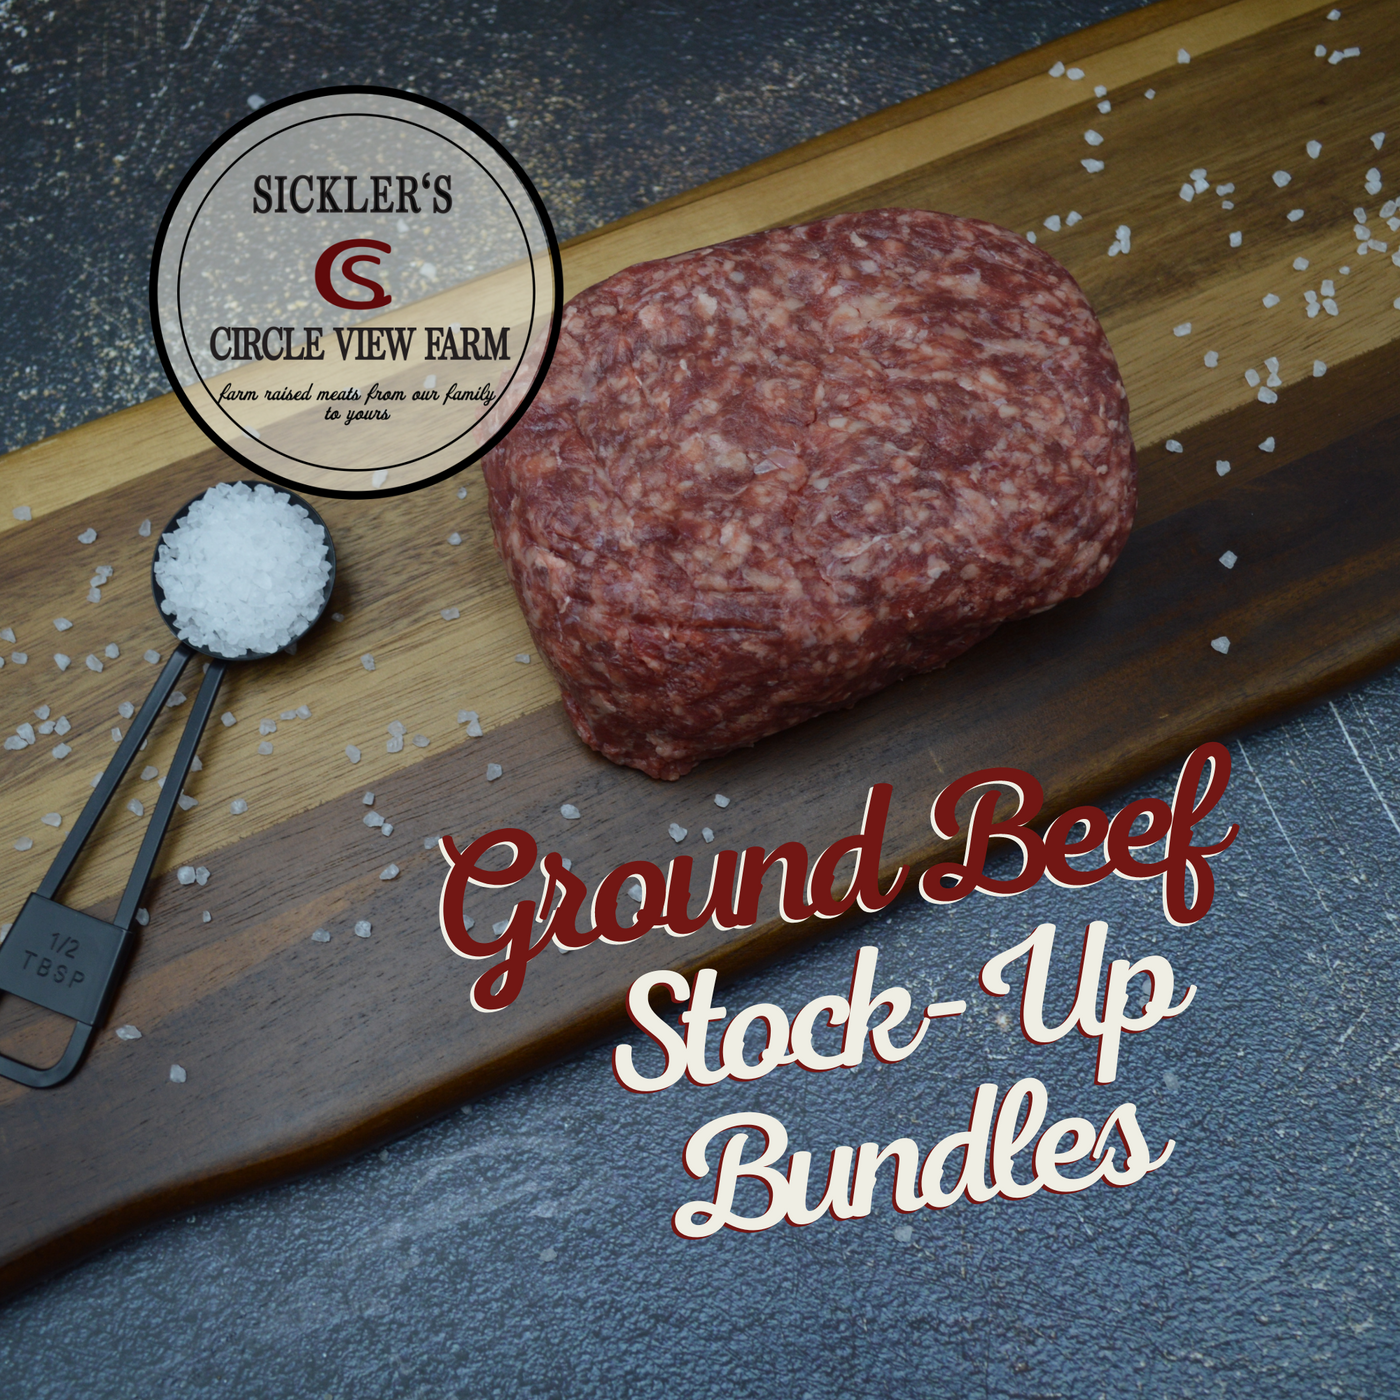 Ground Beef Stock-Up Subscribe and Save another 2%!